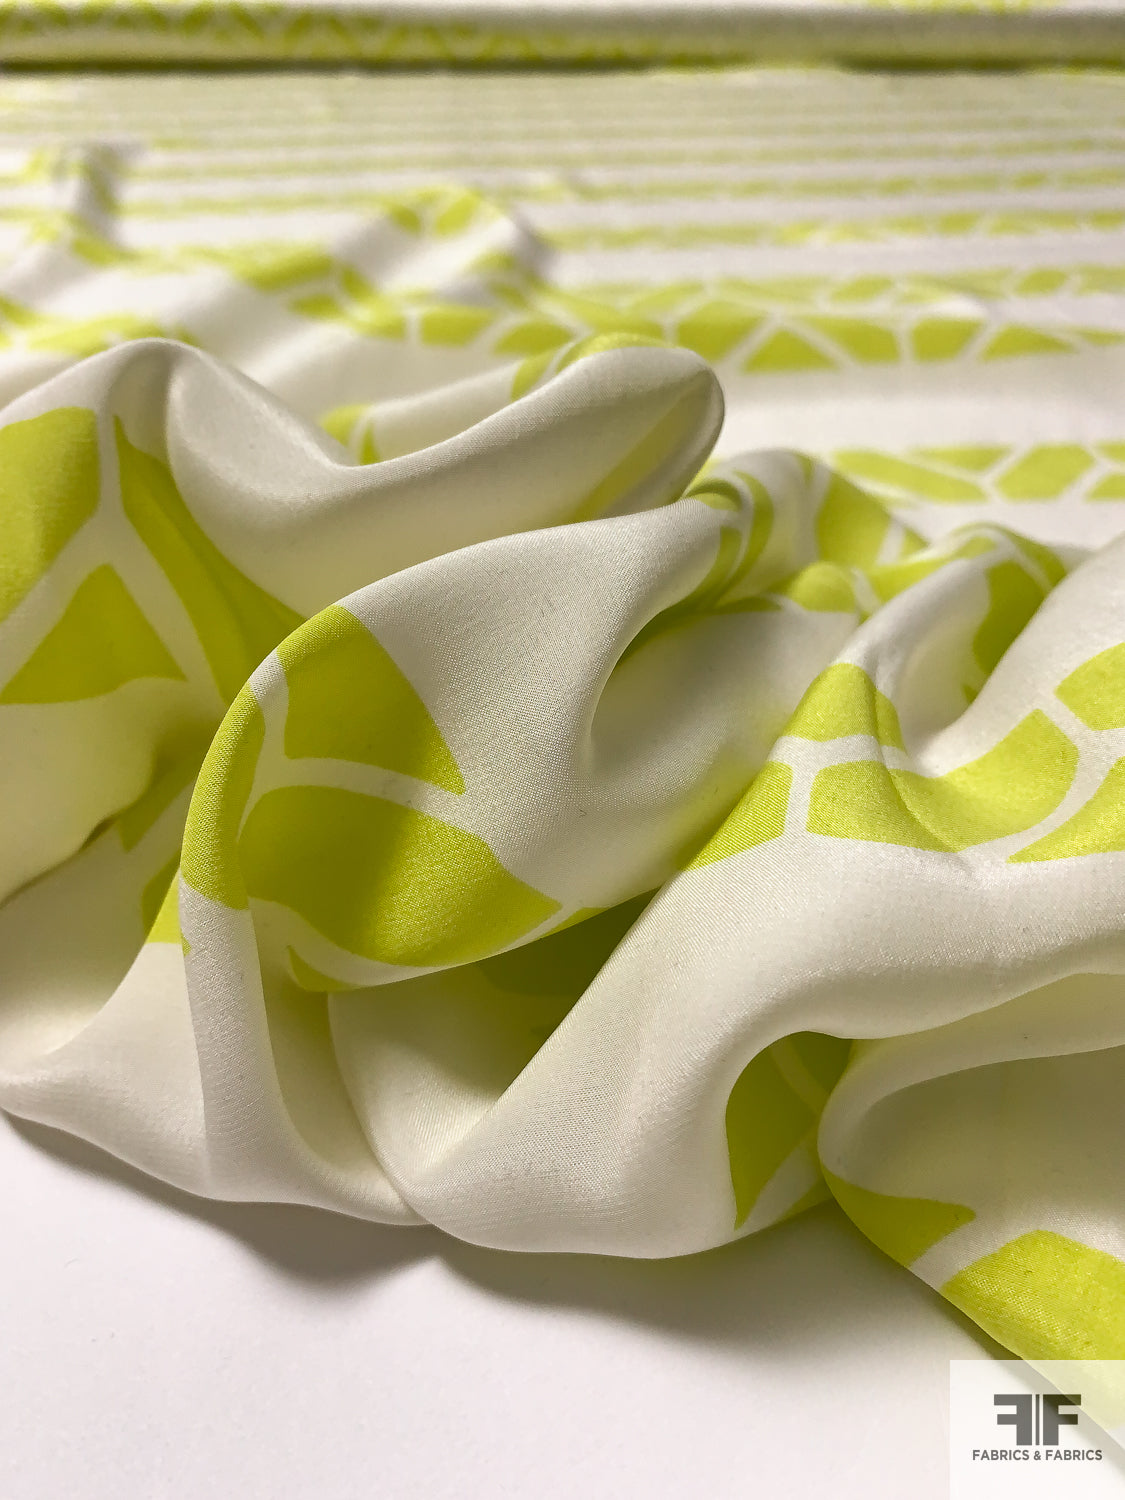 Geometric Striped Matte-Side Printed Silk Charmeuse - Lime / Off-White